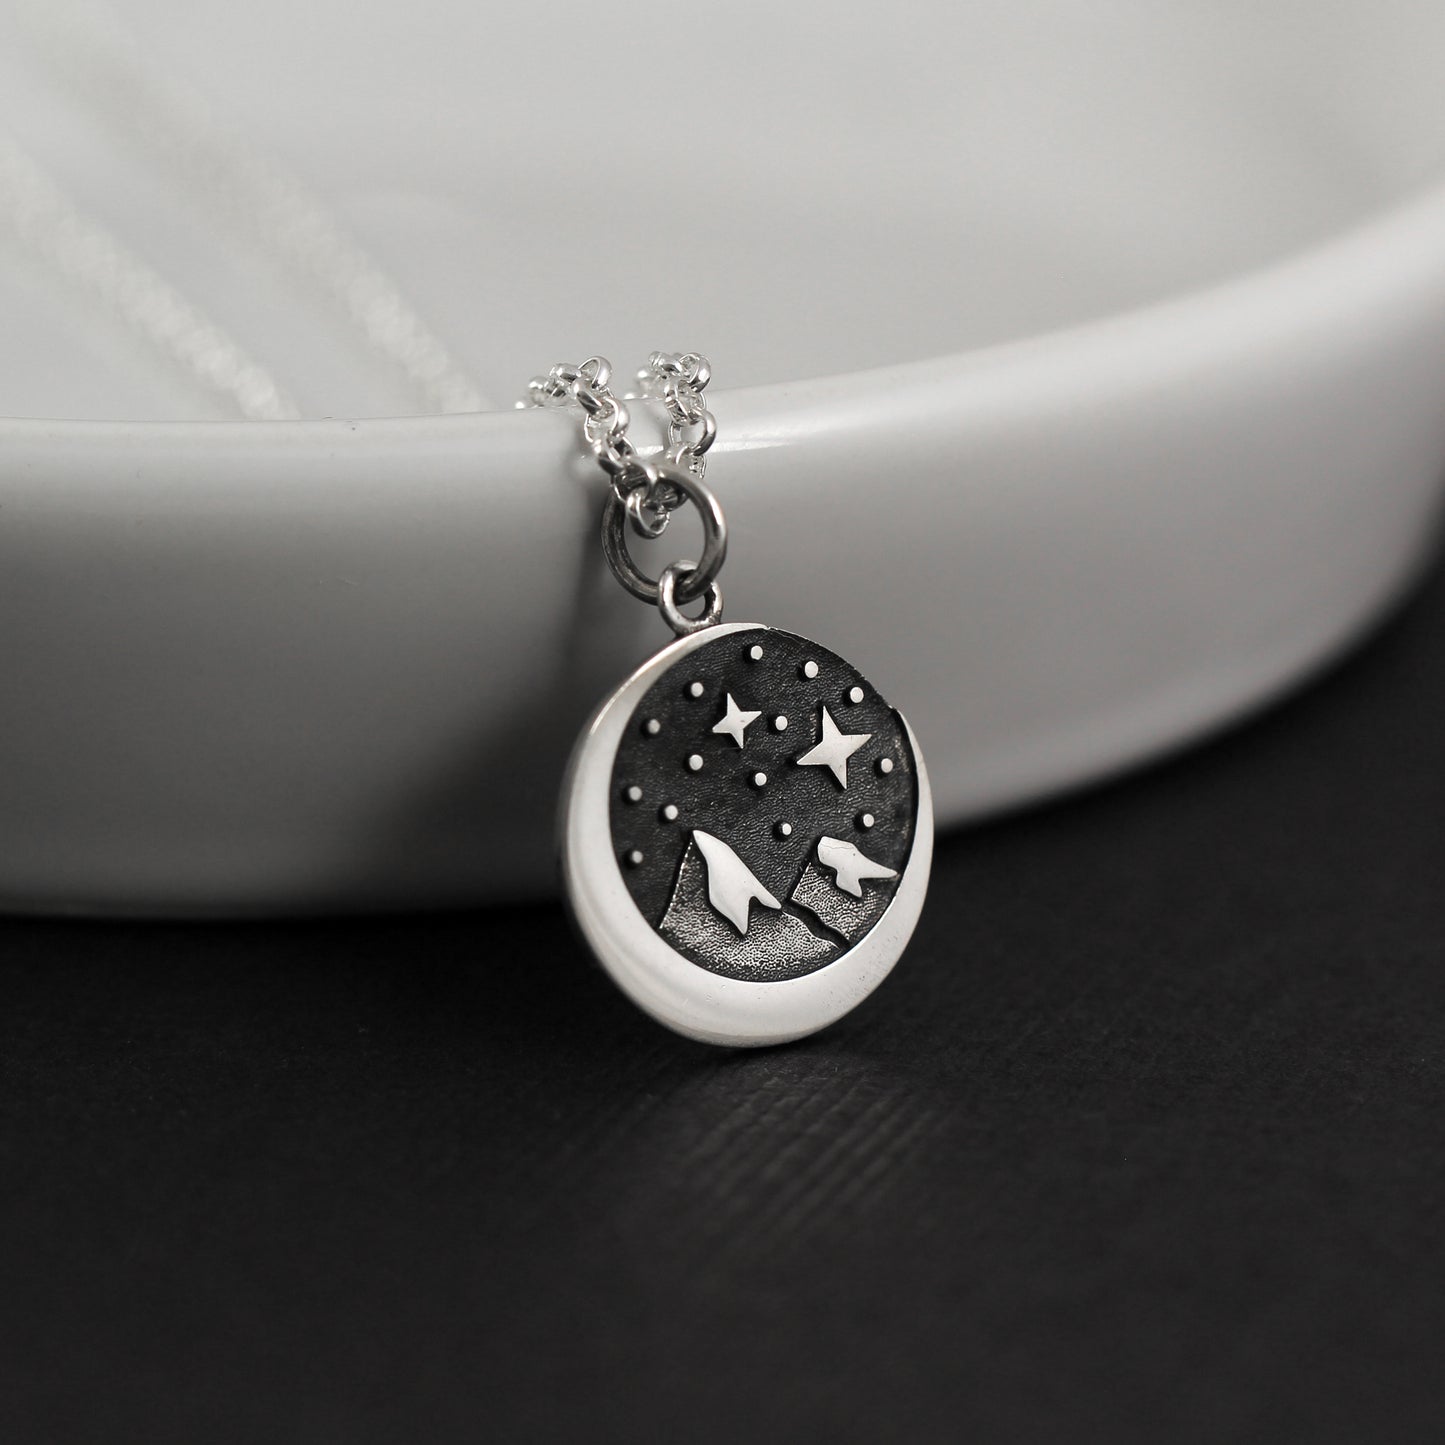 Sterling Silver Star Moon & Mountains Pendant Necklace • Starry Night Mountain Charm • Crescent Moon • Snow Capped Mountain Pendant Necklace • Hiking Camping Outdoor Nature Lover Gifts for Women